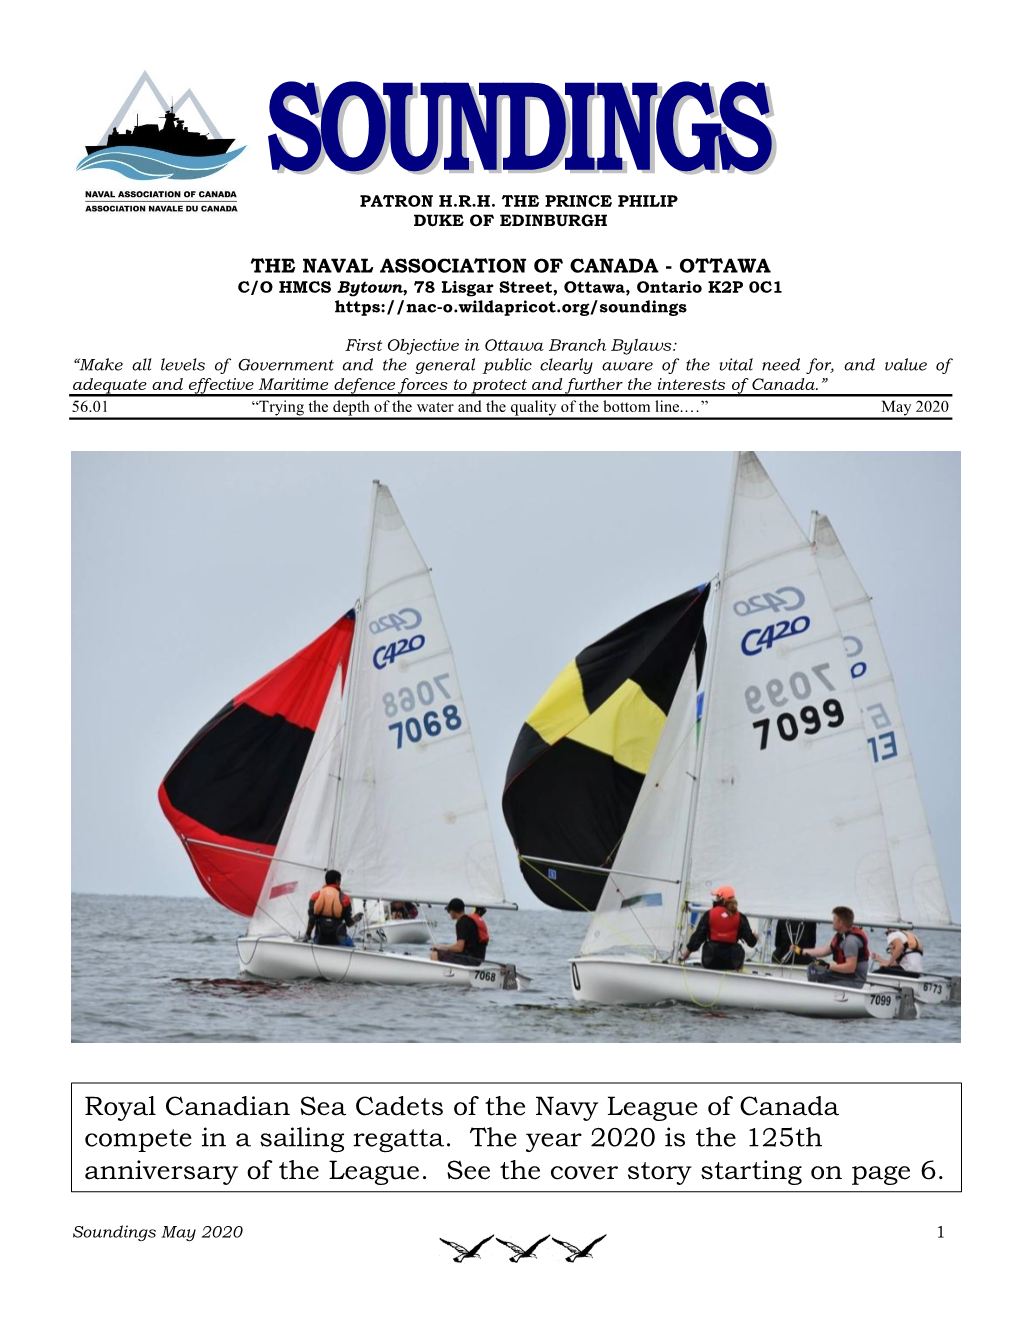 Royal Canadian Sea Cadets of the Navy League of Canada Compete in a Sailing Regatta